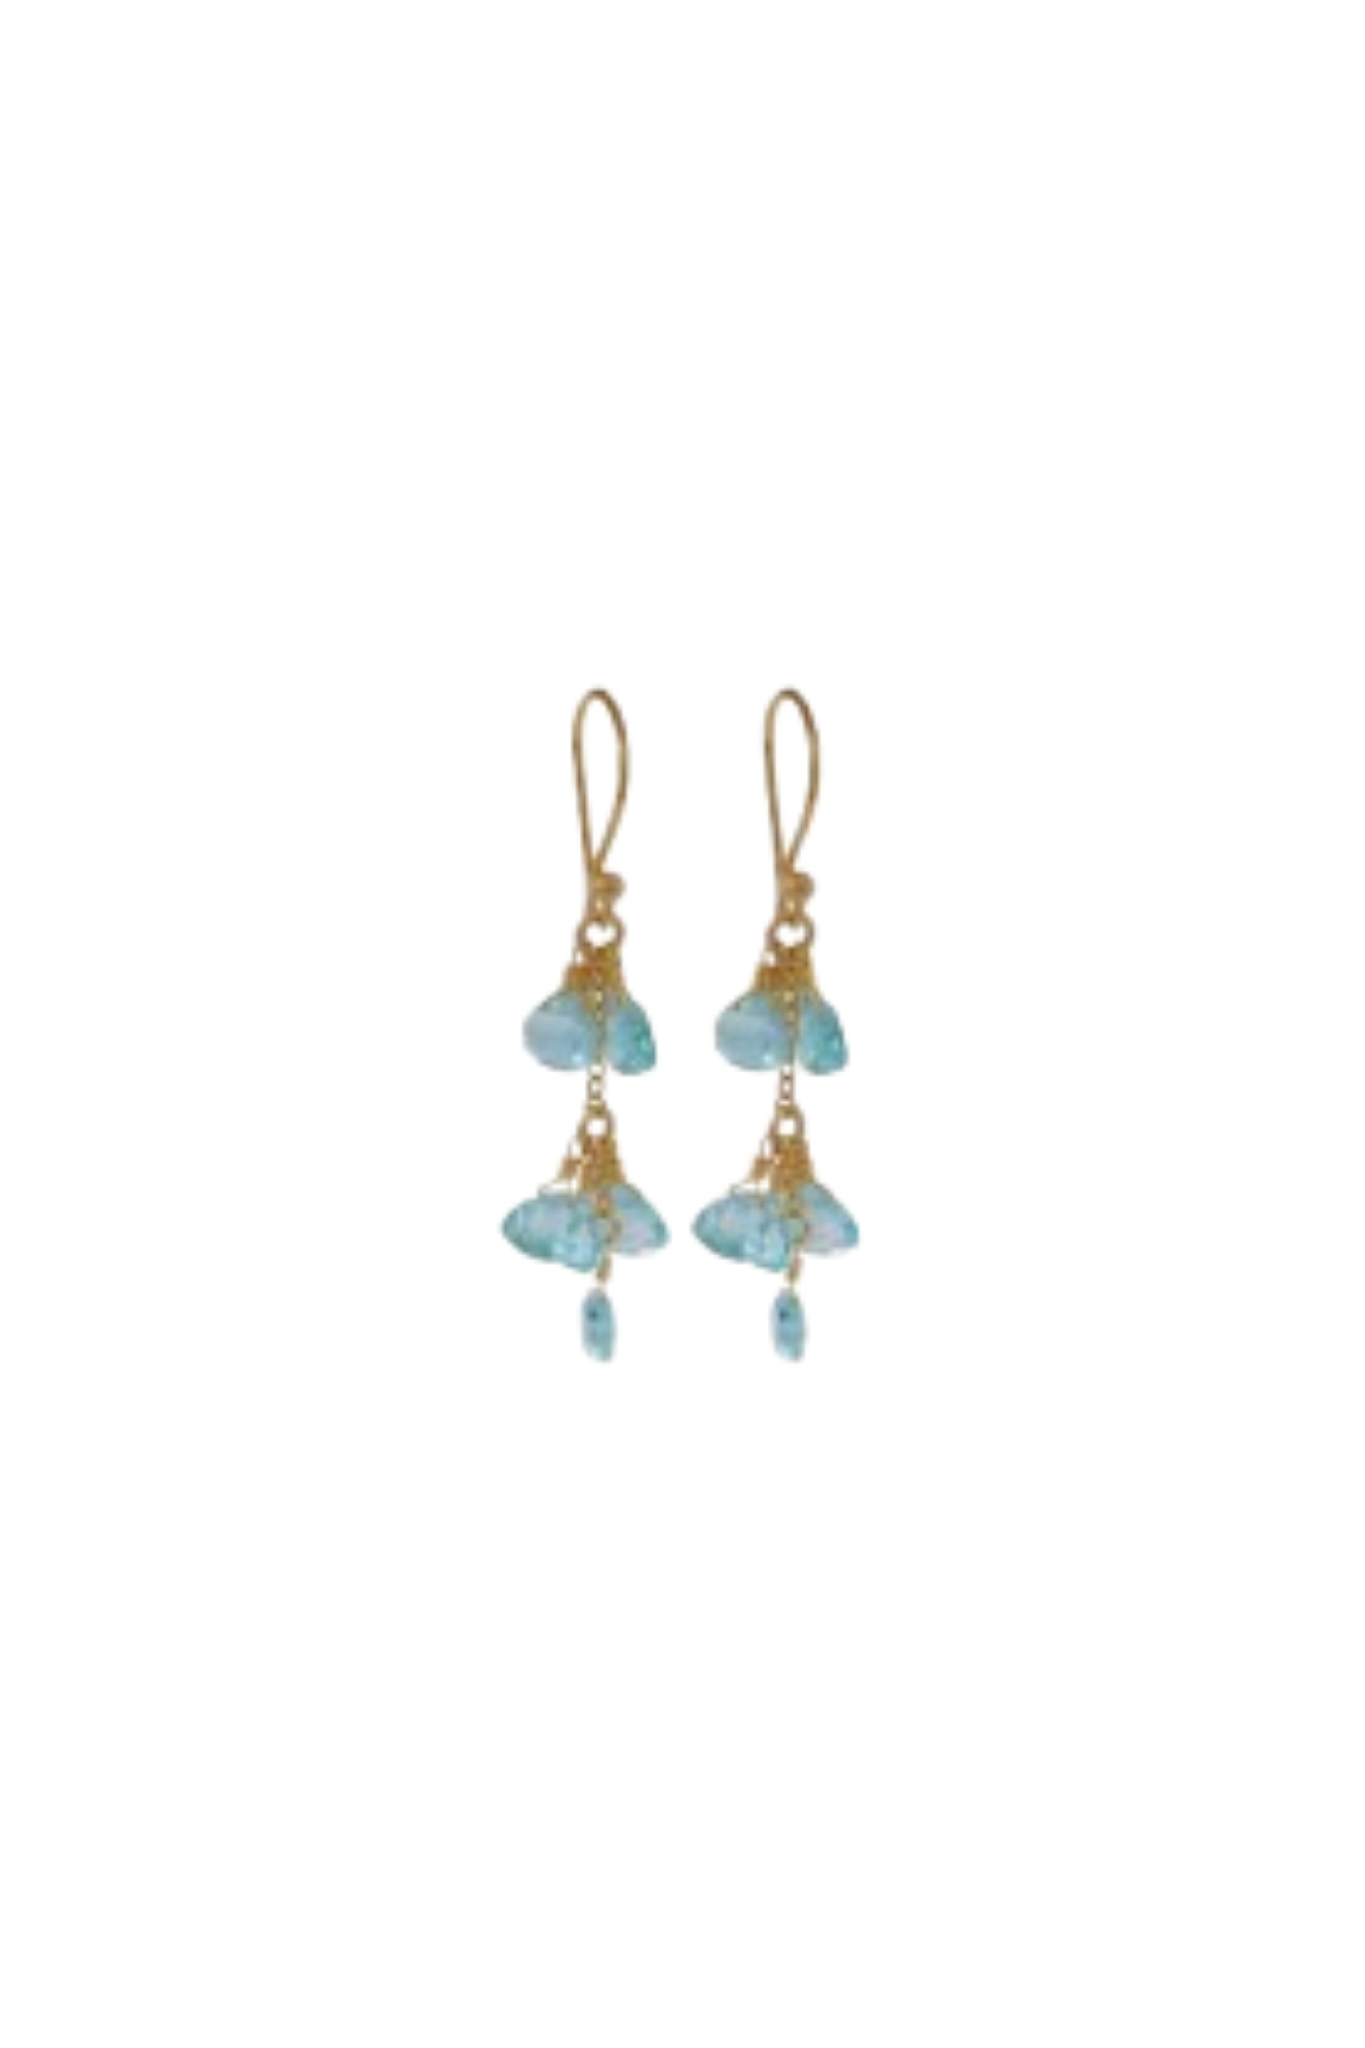 Two Tier Gold Earrings with Chalcedony Drops